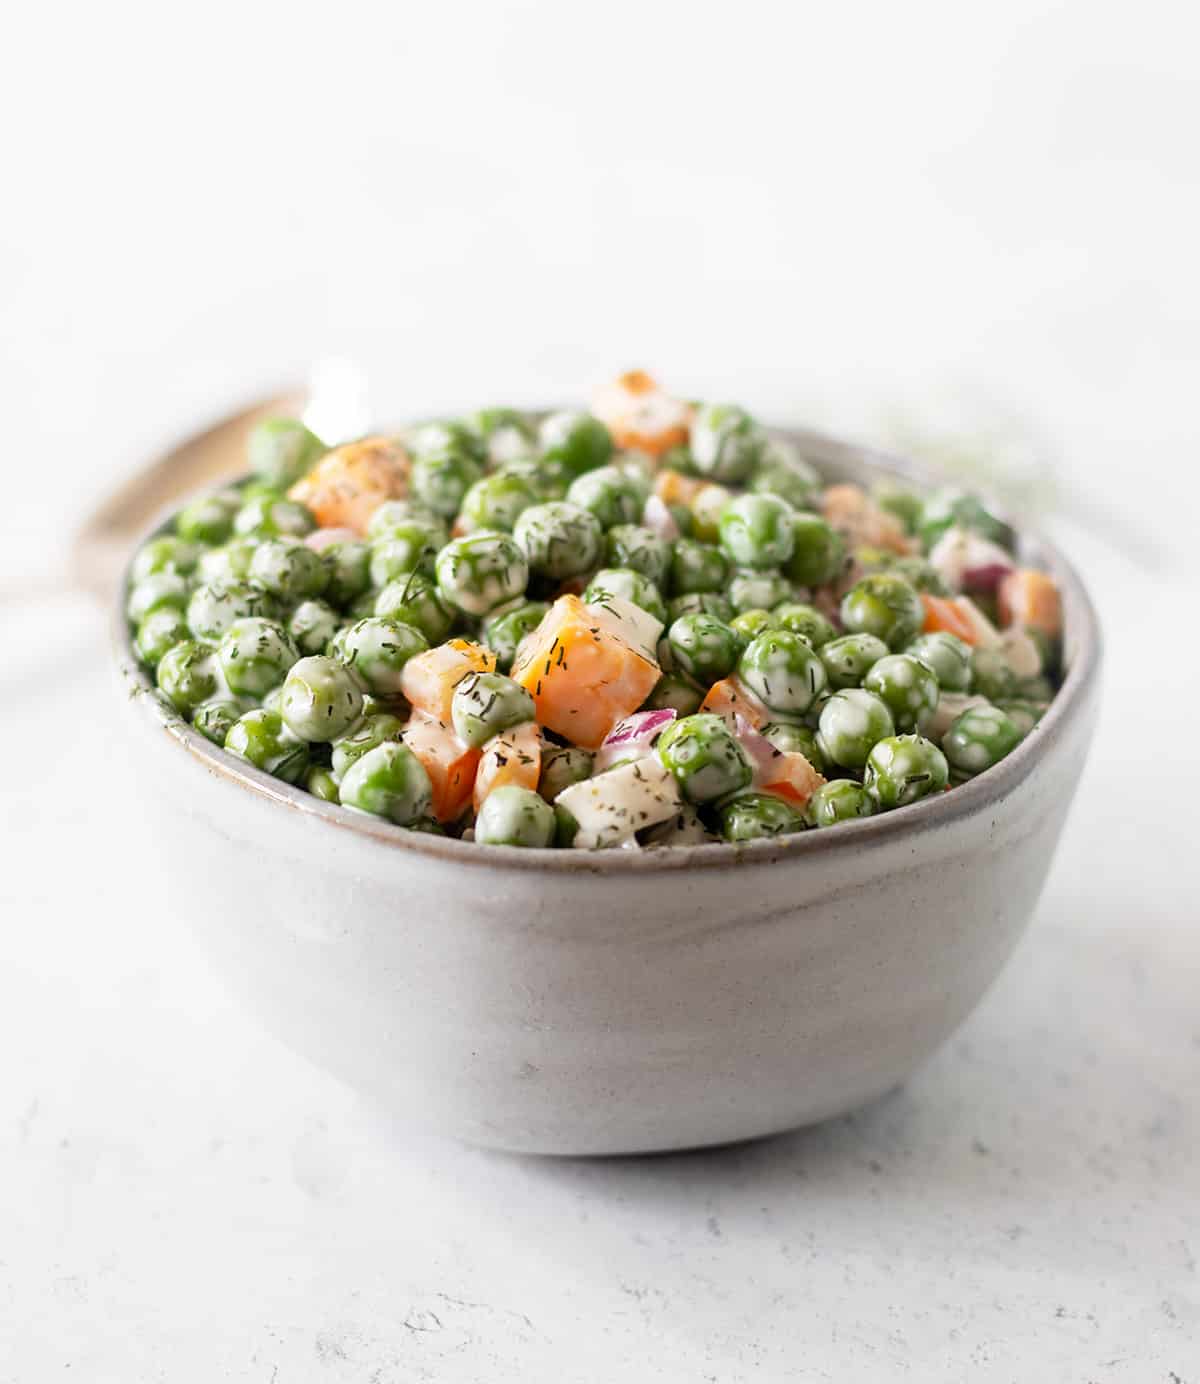 pea salad in a grey bowl garnished with dill weed.